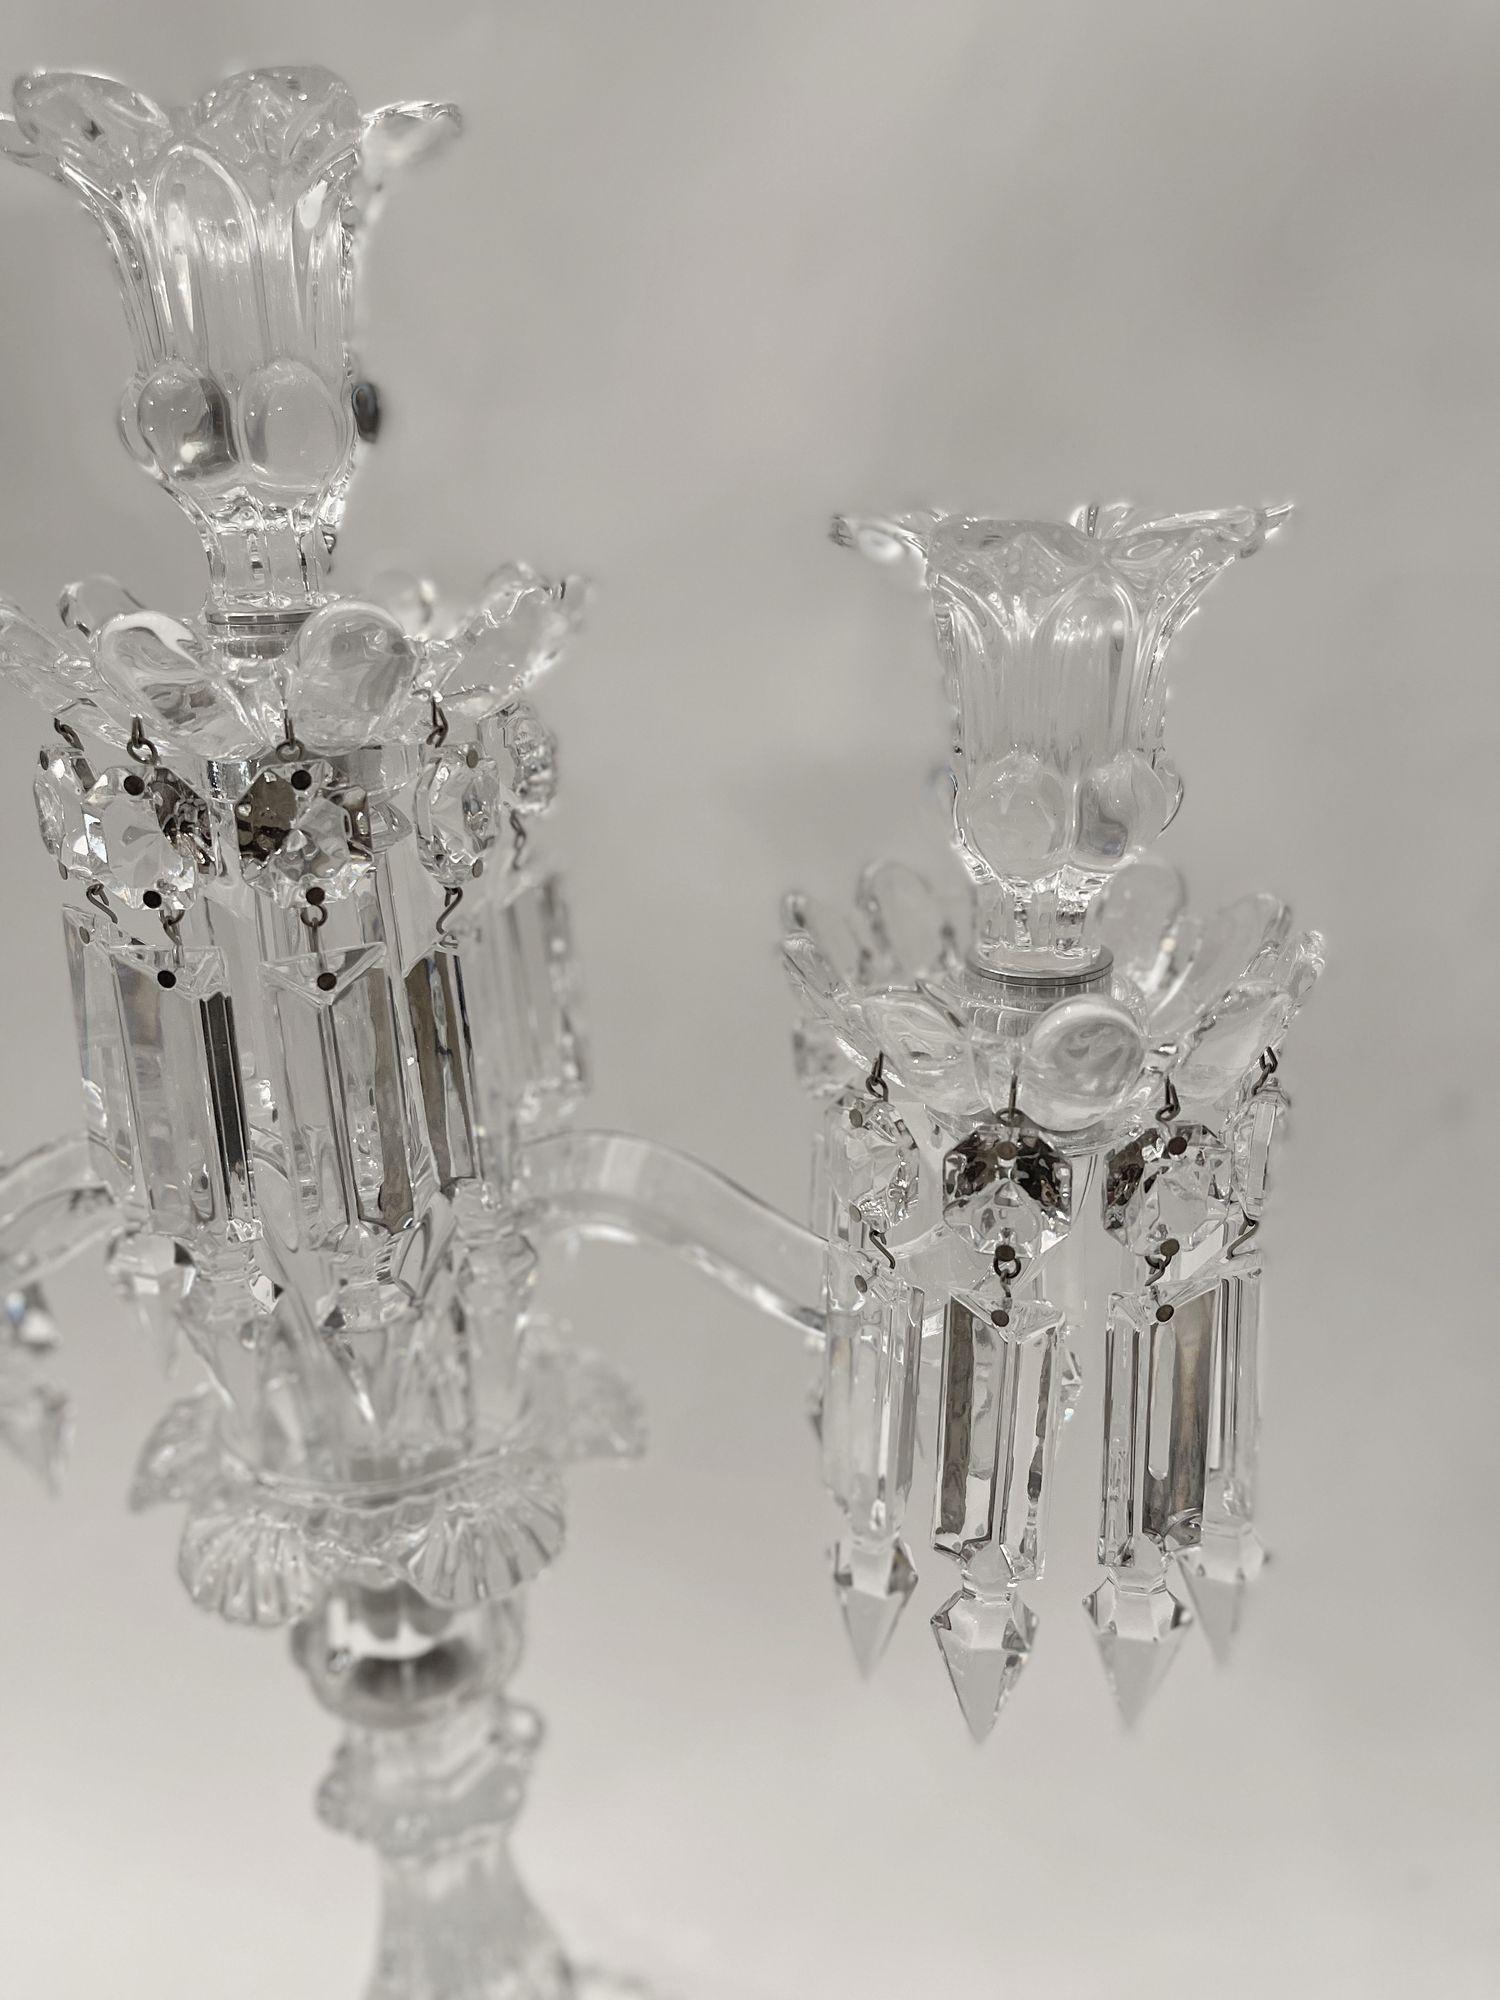 Contemporary Pair of Mid-Century Modern Neoclassical Glass Obelisk Candelabras by Baccarat